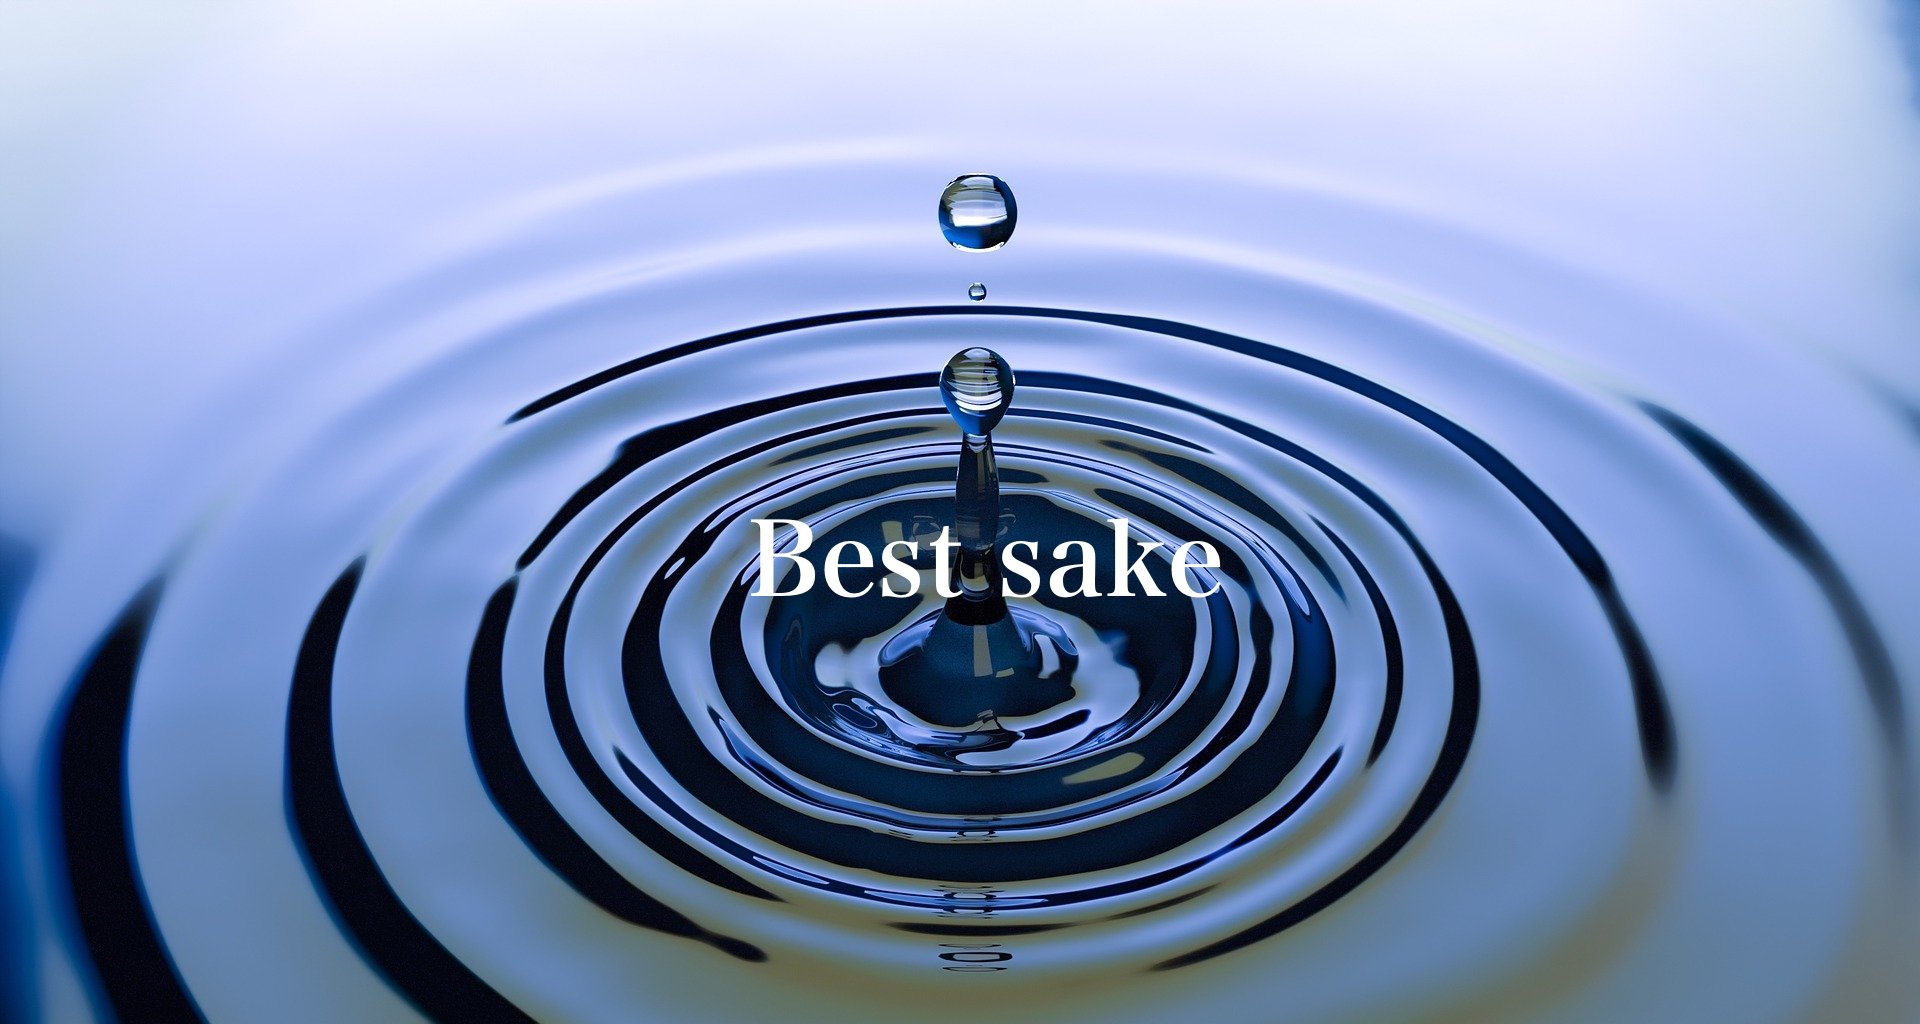 The highest quality of sake, rank the drink at least once!